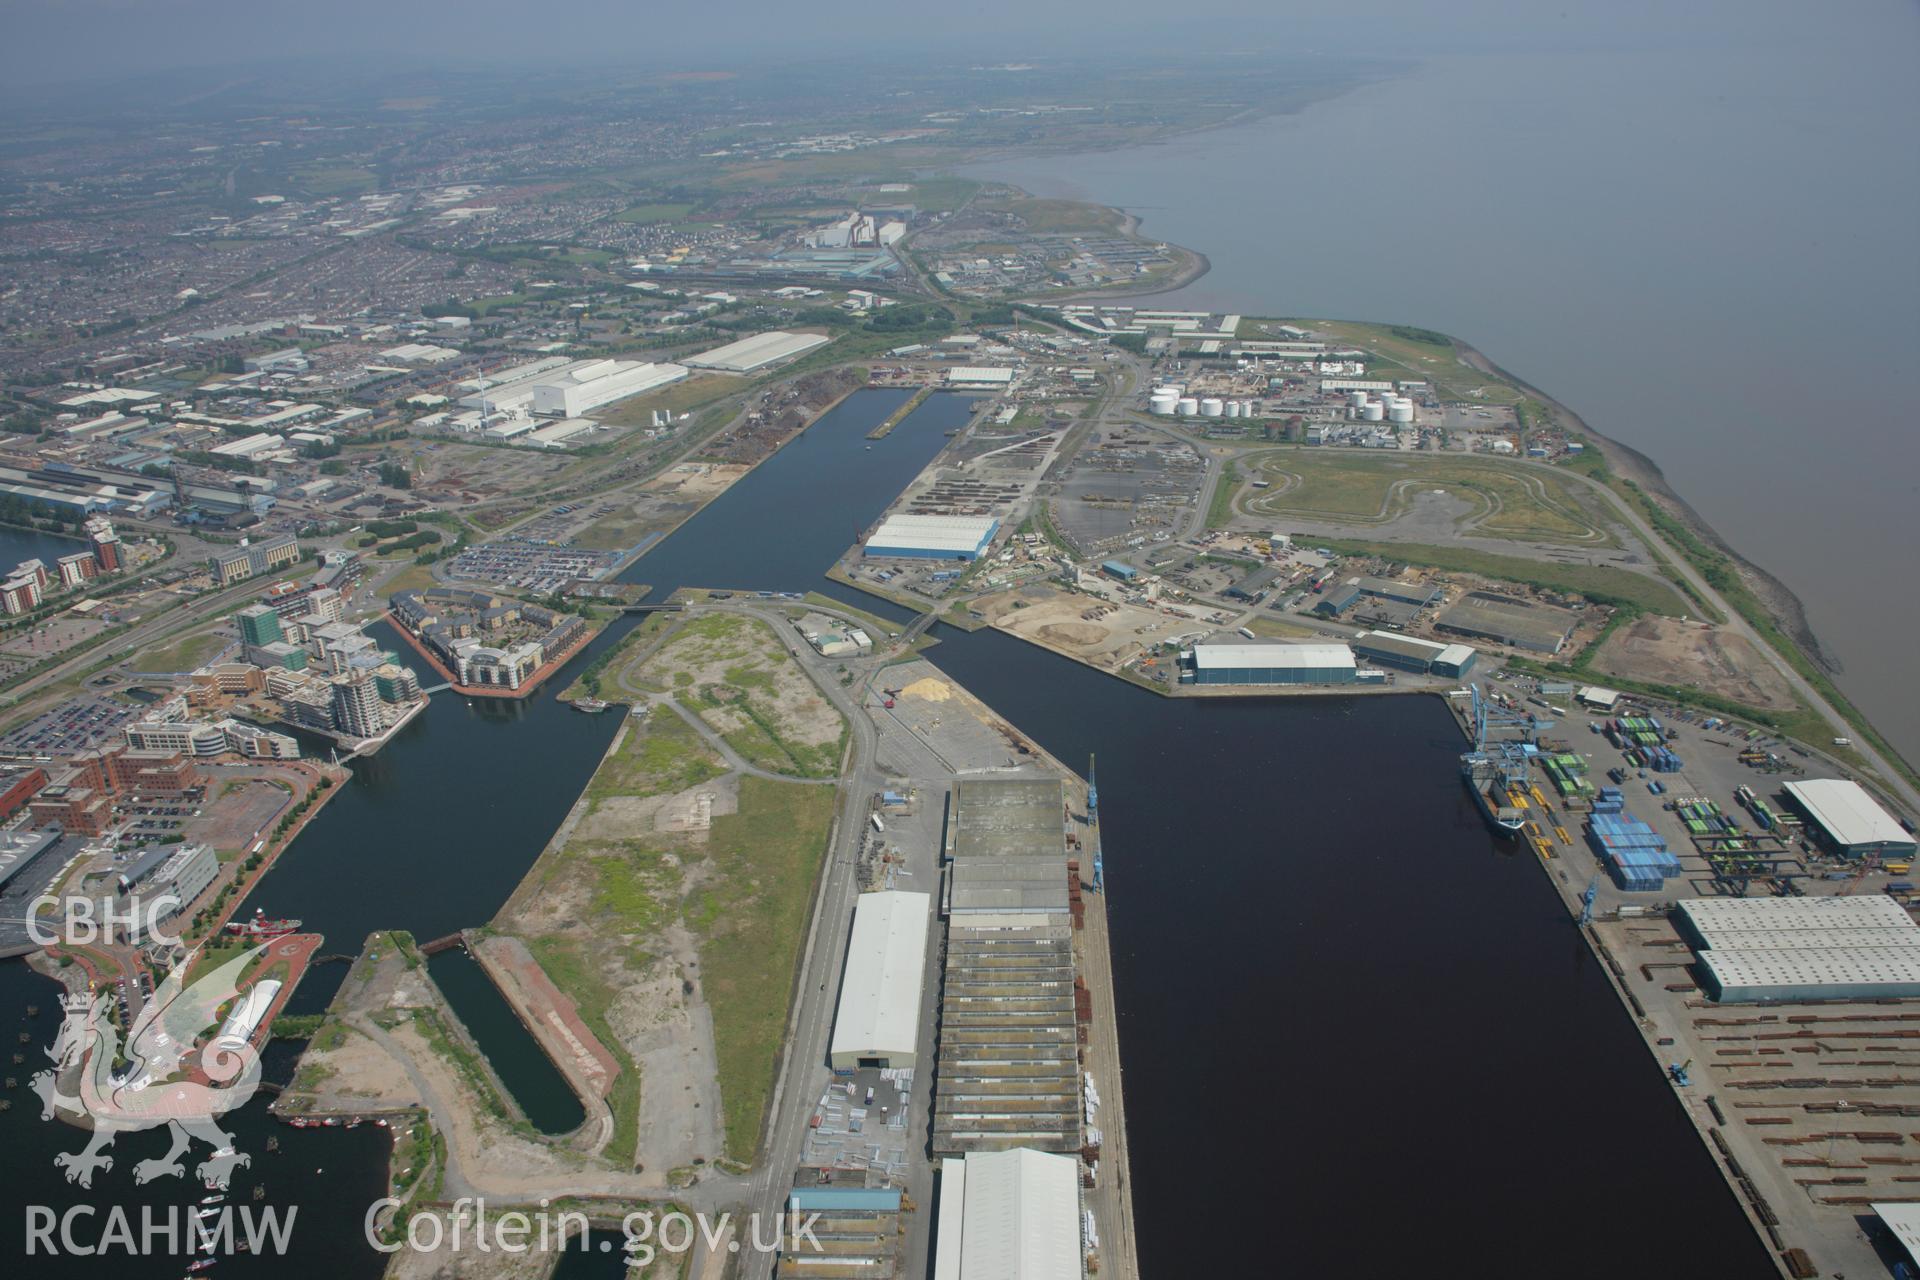 RCAHMW colour oblique photograph of Cardiff Bay, Queen Alexandra Dock. Taken by Toby Driver on 29/06/2006.